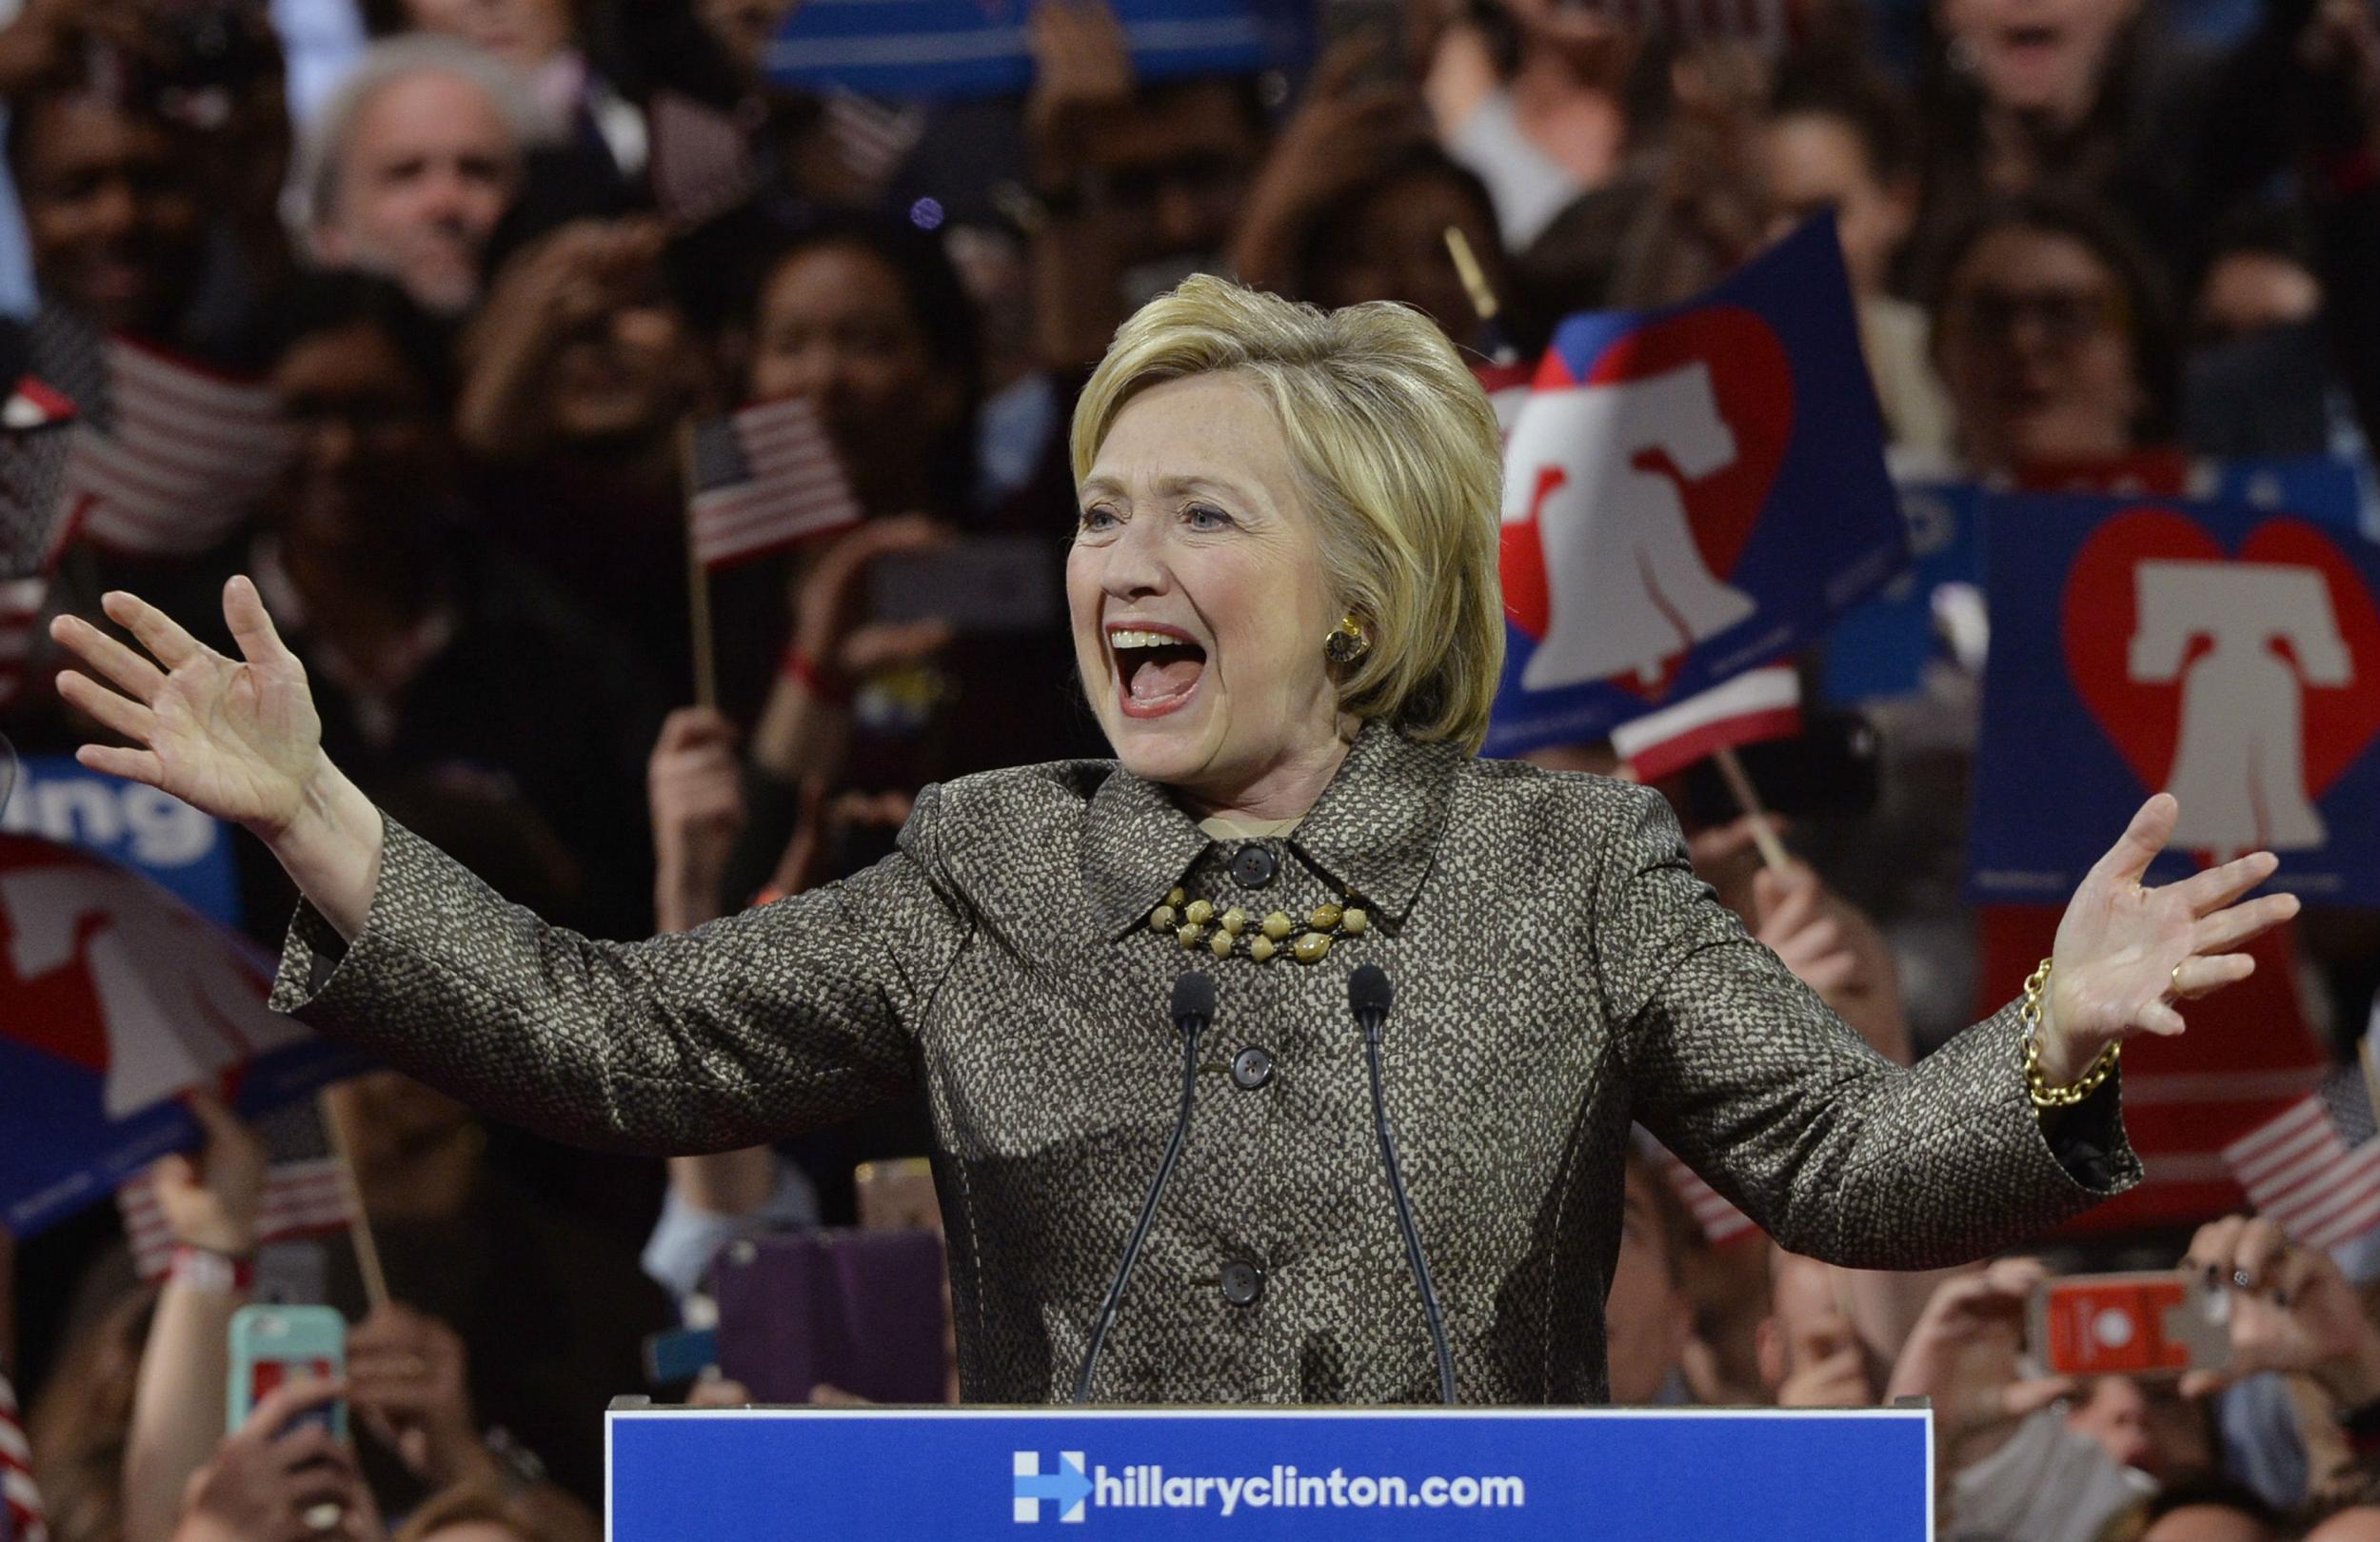 Hillary Clinton thanked her supporters after being declared winner in three states